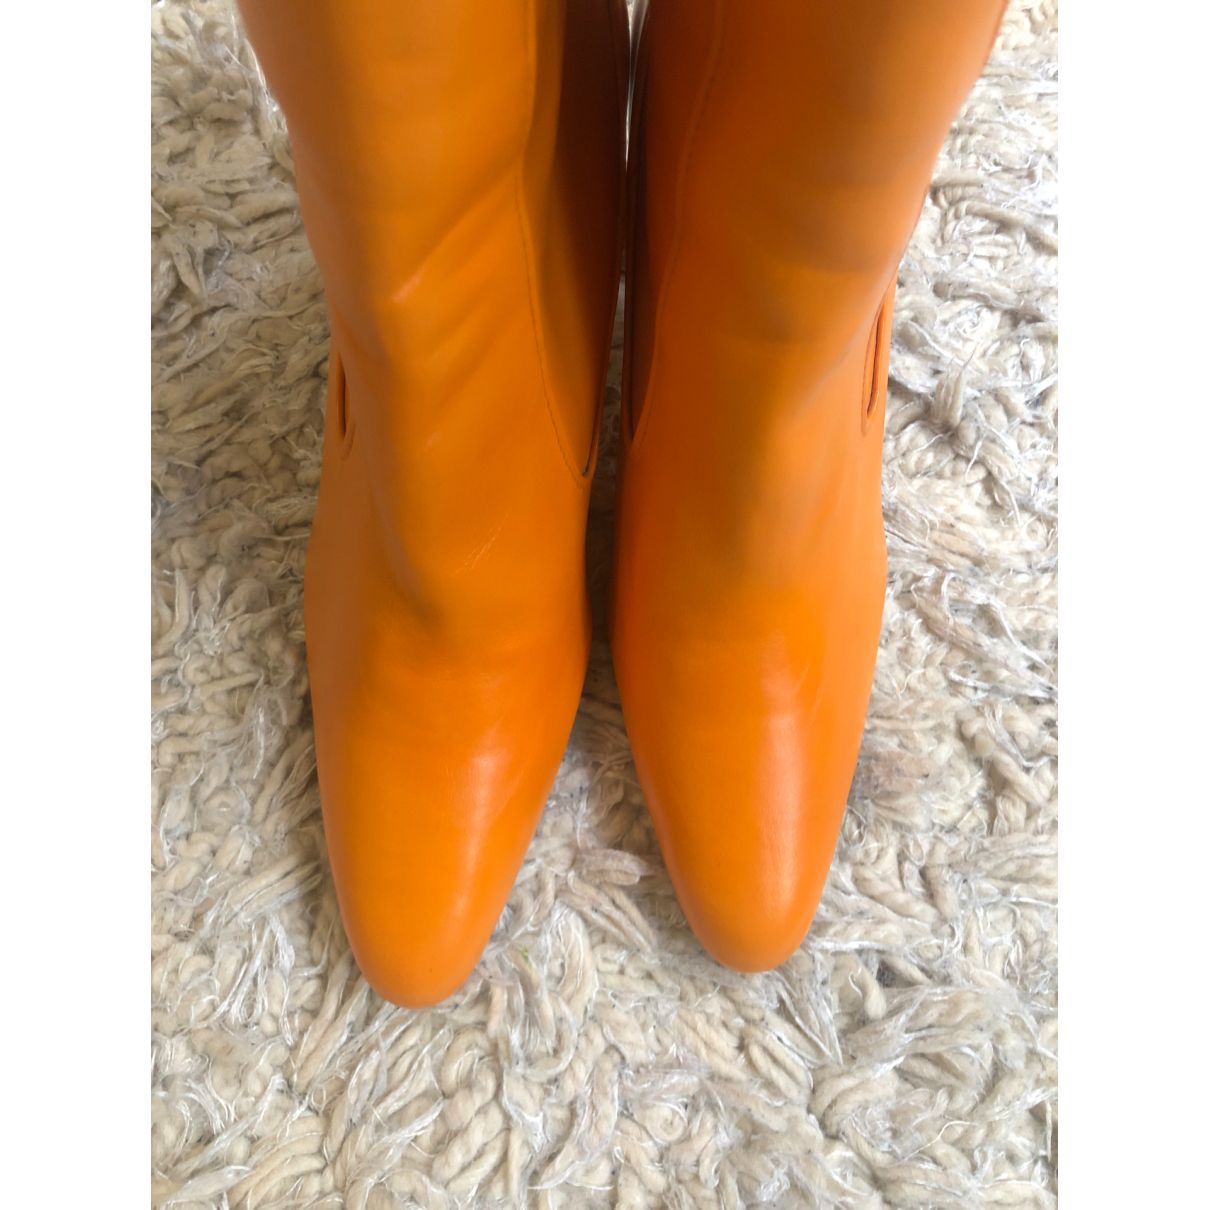 Leather ankle boots Zara size 38 EU in Leather -